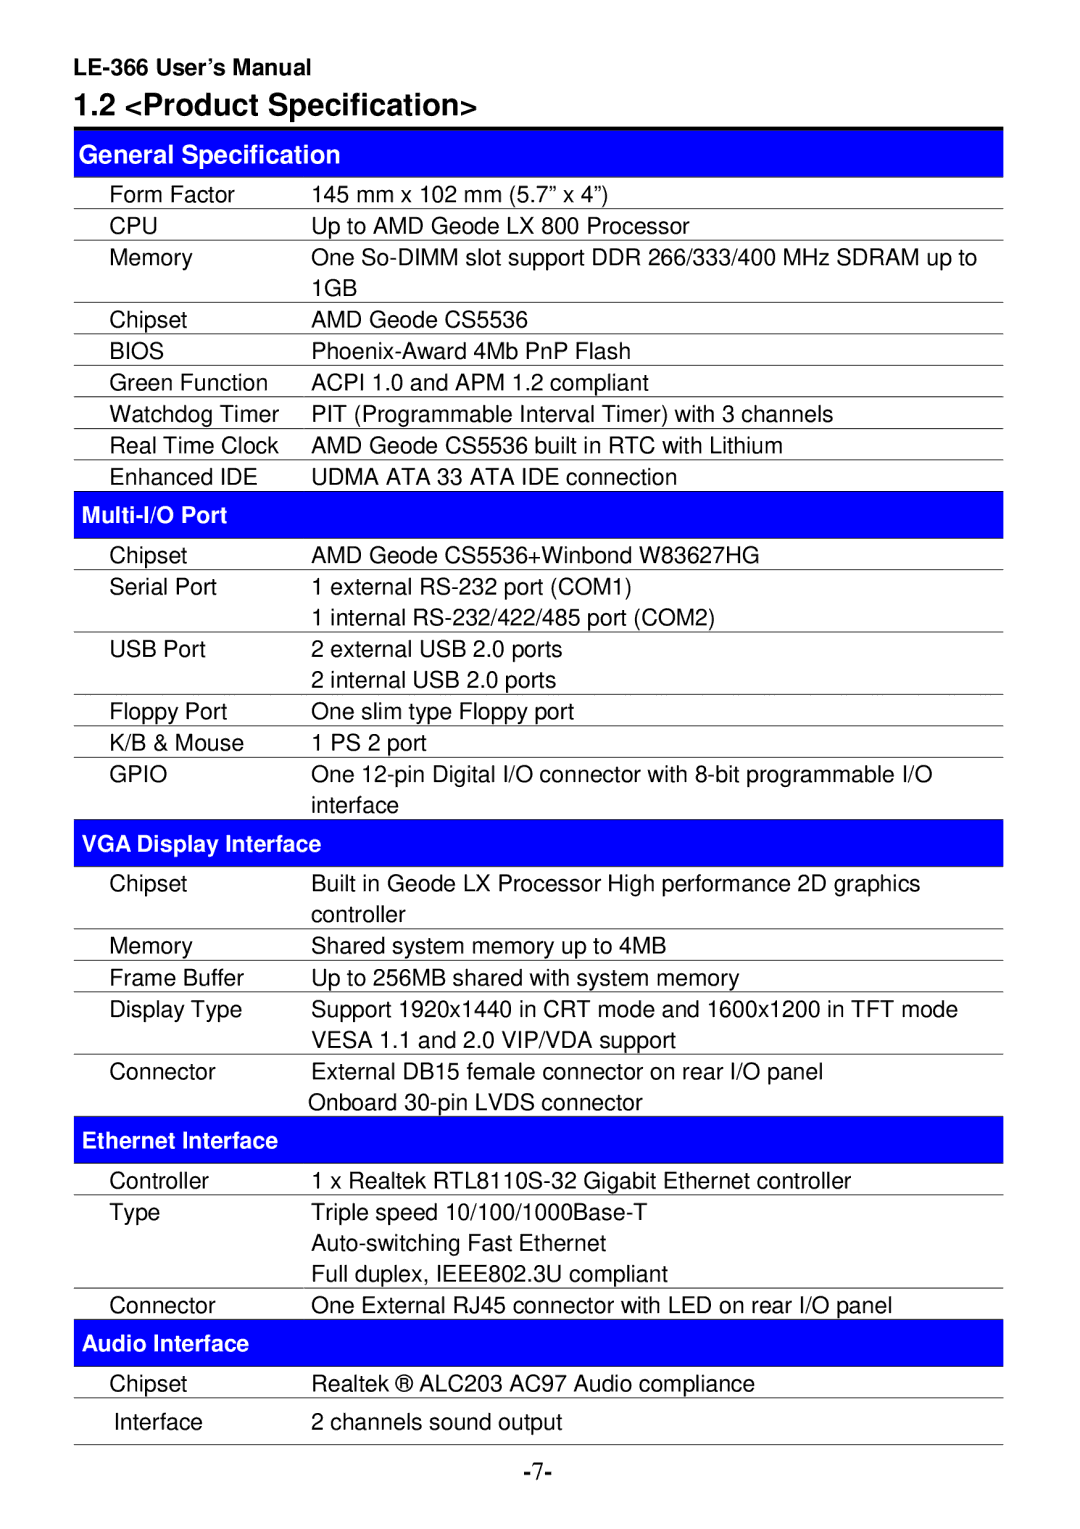 AMD LX800 user manual Product Specification, General Specification 